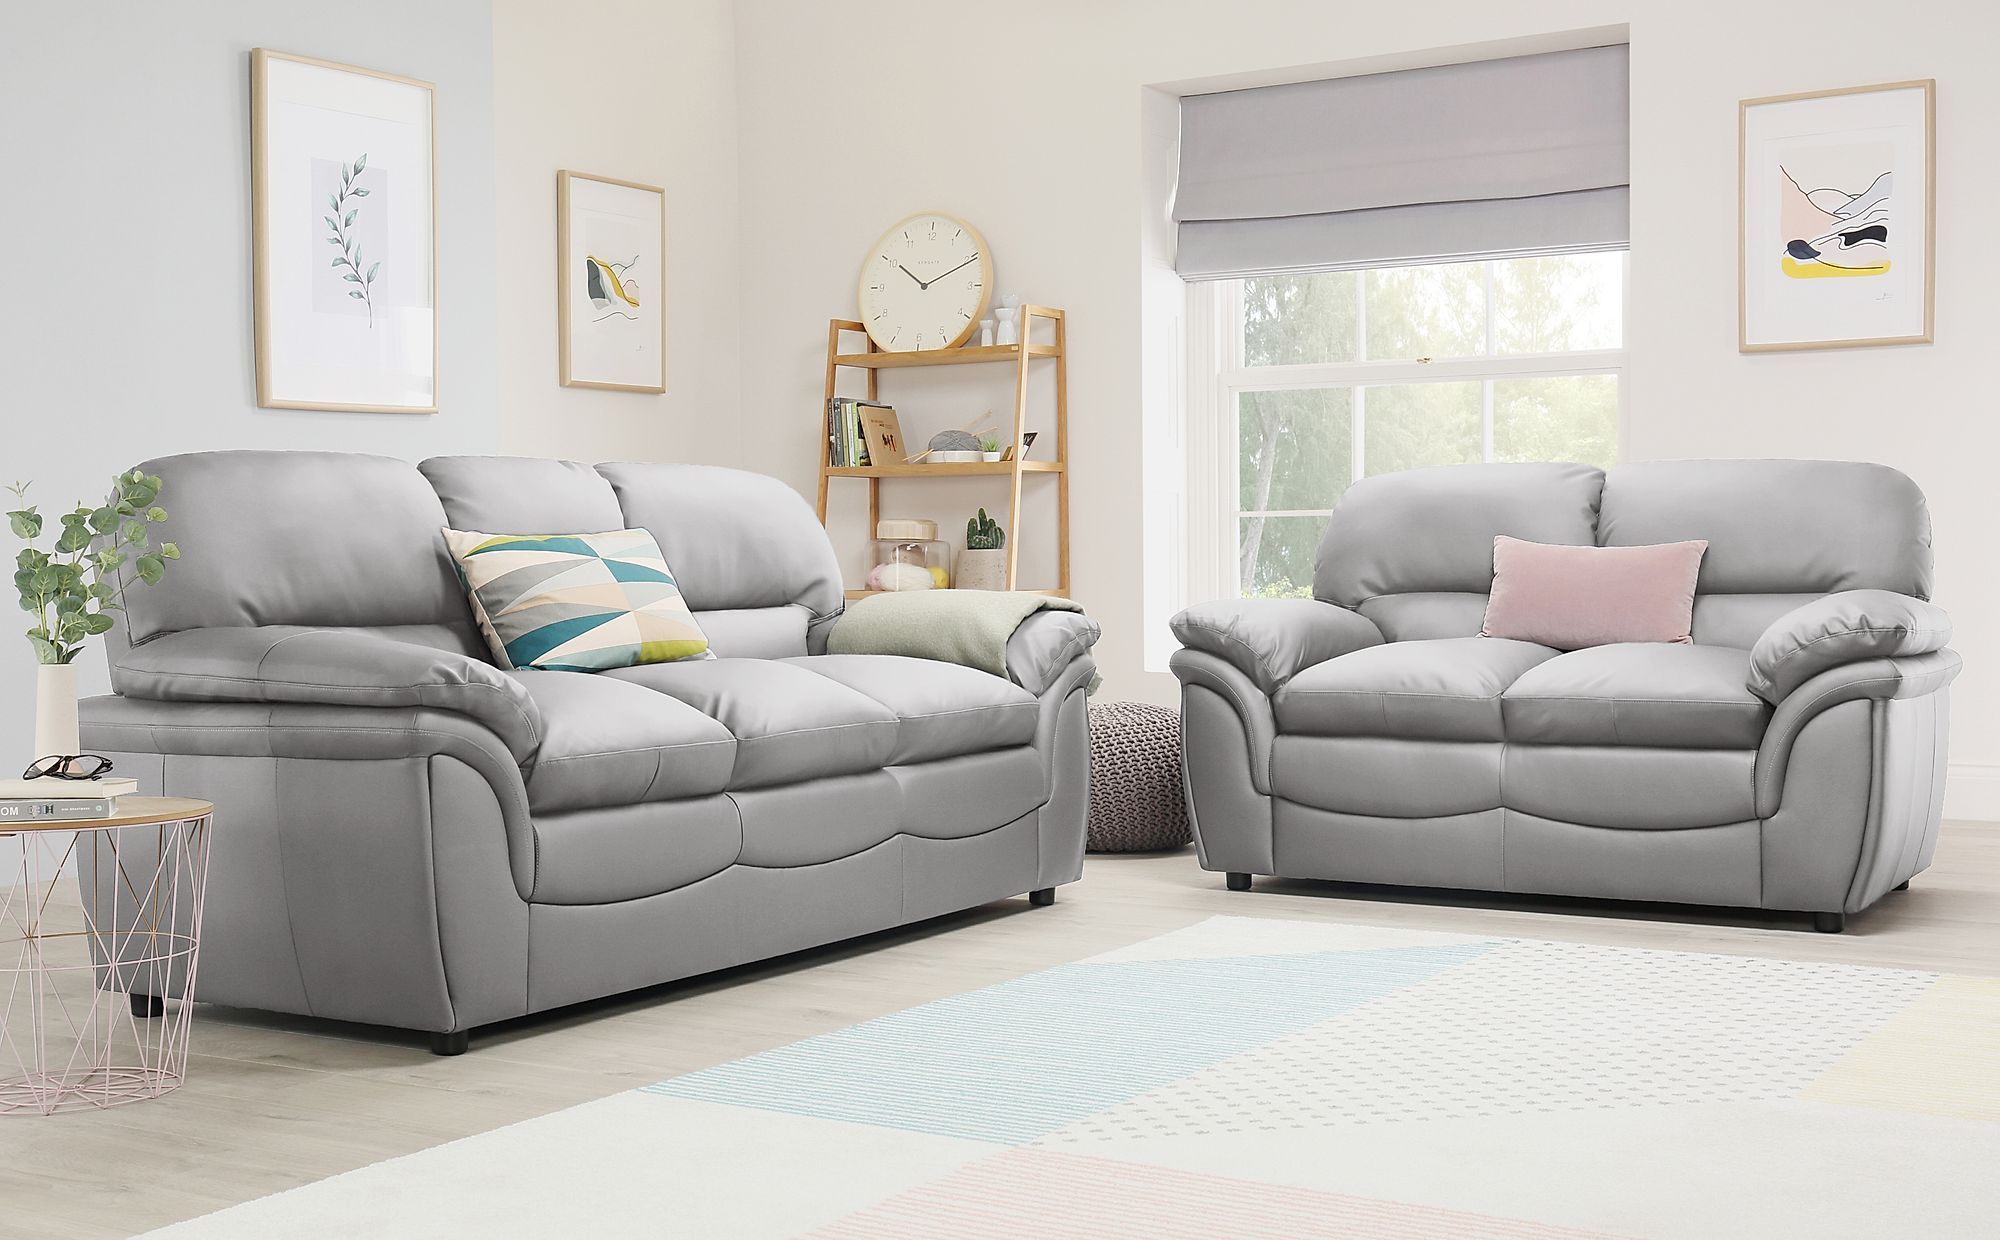 Rochester Light Grey Leather 3+2 Seater Sofa Set | Furniture Choice Throughout Sofas In Light Gray (View 9 of 22)